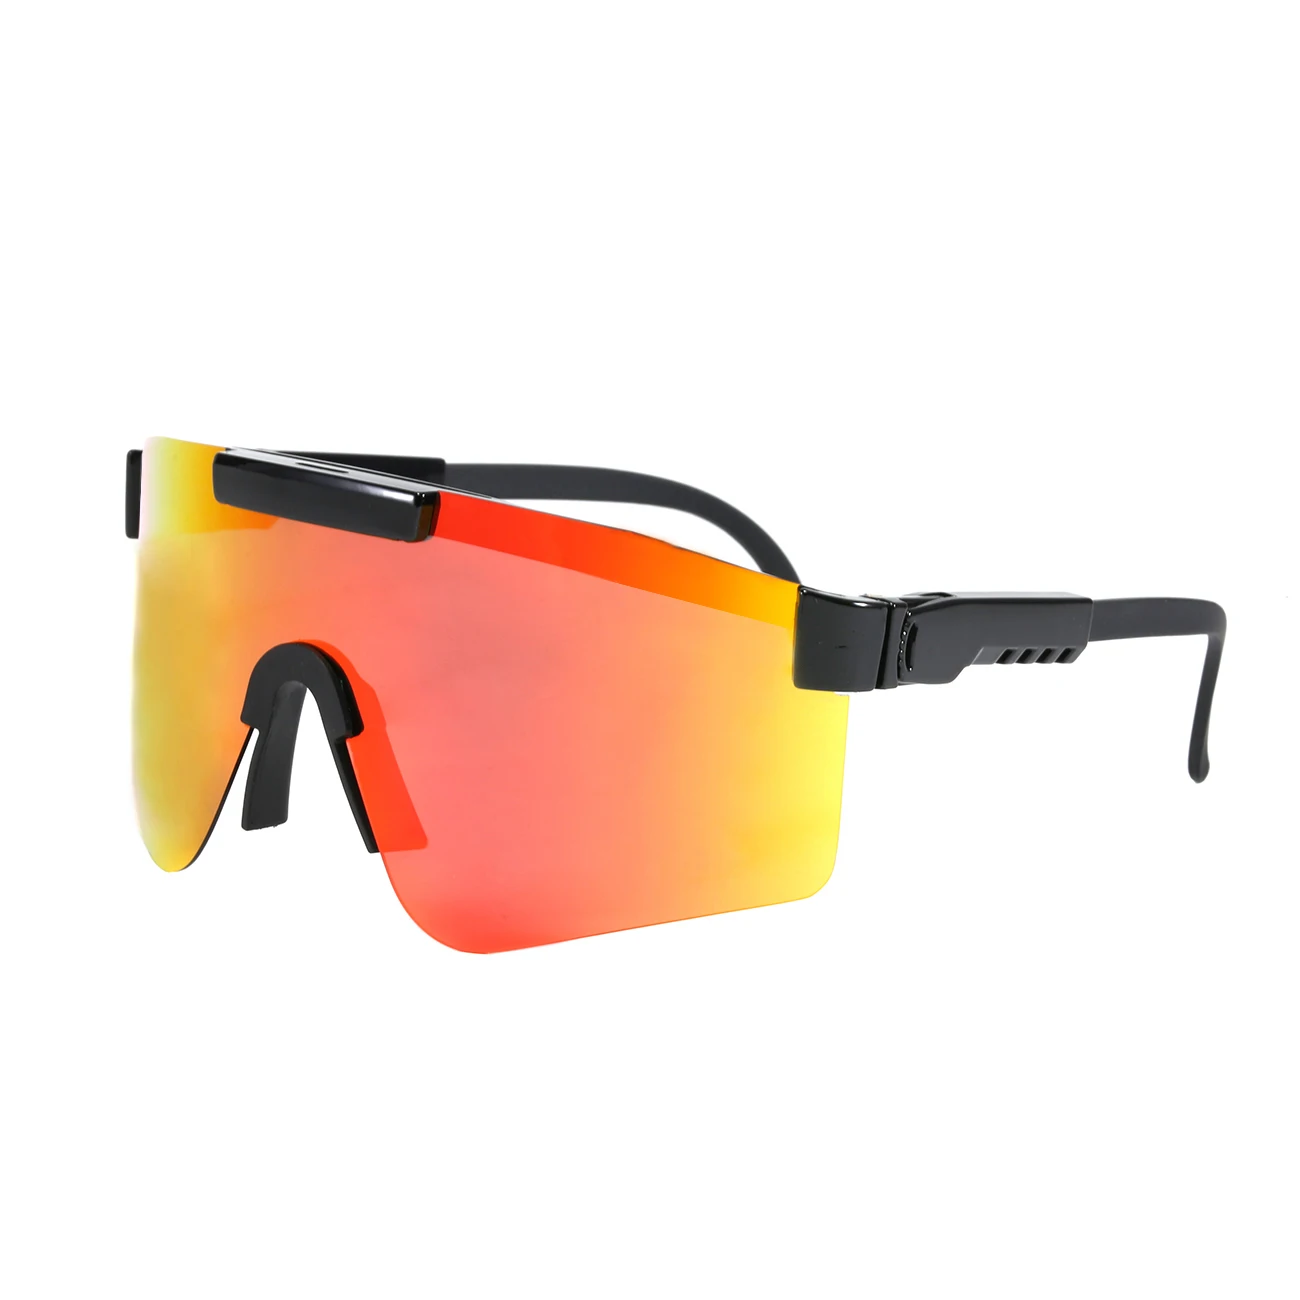 

Pits Vipers Custom Sunglasses TR90 Frame Mirrored Lens For Men Women Windproof Cycling Sport Polarized Sunglasses